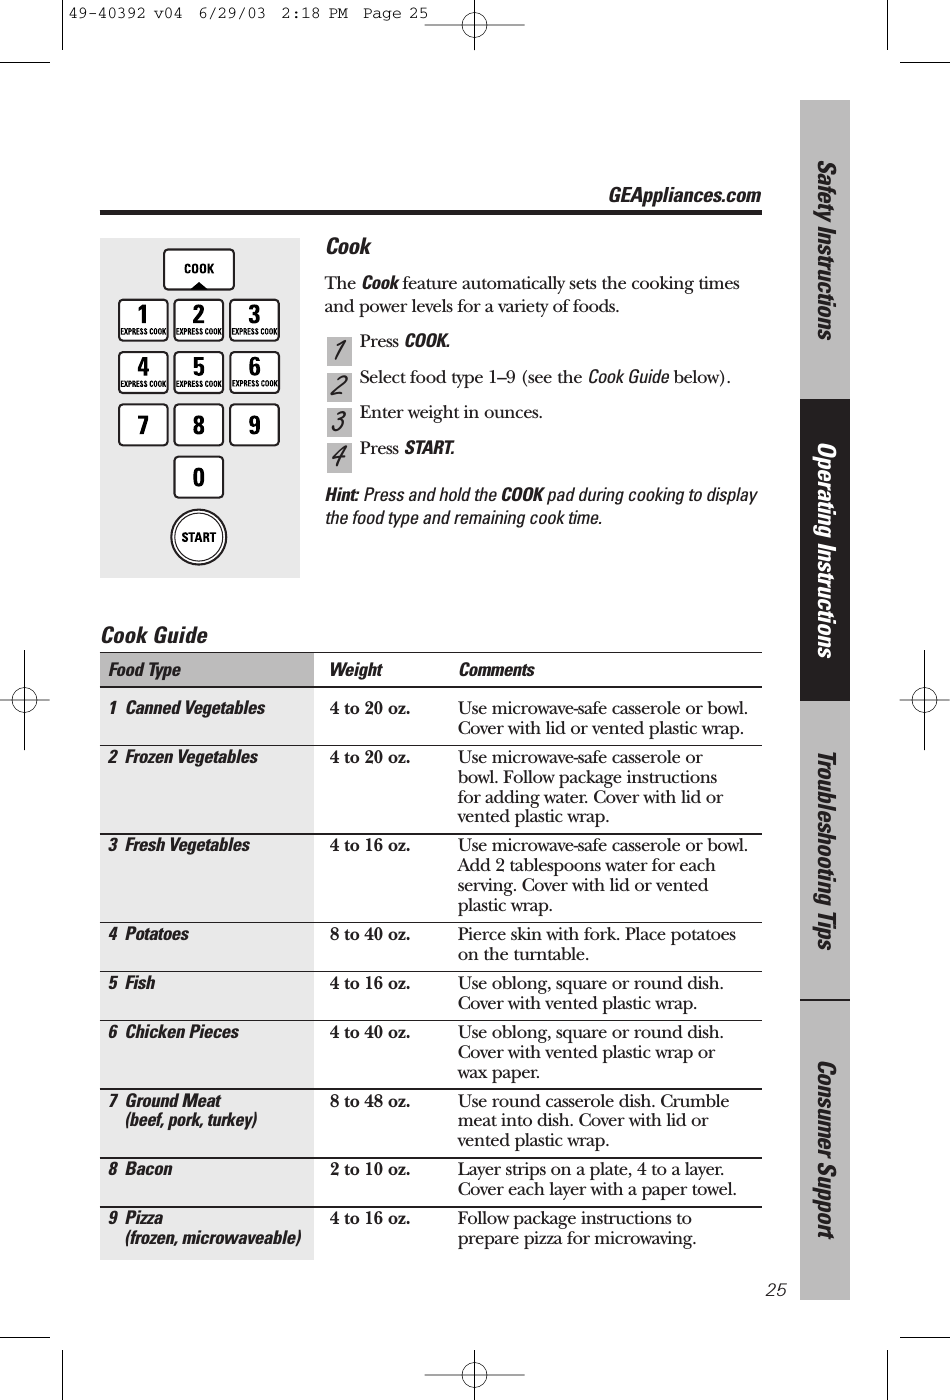 GEAppliances.comConsumer SupportTroubleshooting TipsOperating InstructionsSafety Instructions25CookThe Cook feature automatically sets the cooking timesand power levels for a variety of foods.Press COOK.Select food type 1–9 (see the Cook Guide below).Enter weight in ounces.Press START.Hint: Press and hold the COOK pad during cooking to displaythe food type and remaining cook time.43211 Canned Vegetables 4 to 20 oz. Use microwave-safe casserole or bowl. Cover with lid or vented plastic wrap.2 Frozen Vegetables 4 to 20 oz. Use microwave-safe casserole or bowl. Follow package instructions for adding water. Cover with lid or vented plastic wrap.3 Fresh Vegetables 4 to 16 oz. Use microwave-safe casserole or bowl. Add 2 tablespoons water for eachserving. Cover with lid or vented plastic wrap.4 Potatoes 8 to 40 oz. Pierce skin with fork. Place potatoes on the turntable.5 Fish 4 to 16 oz. Use oblong, square or round dish. Cover with vented plastic wrap.6 Chicken Pieces 4 to 40 oz. Use oblong, square or round dish. Cover with vented plastic wrap or wax paper.7 Ground Meat 8 to 48 oz. Use round casserole dish. Crumble (beef, pork, turkey)meat into dish. Cover with lid or vented plastic wrap.8 Bacon 2 to 10 oz. Layer strips on a plate, 4 to a layer.Cover each layer with a paper towel.9 Pizza 4 to 16 oz. Follow package instructions to (frozen, microwaveable) prepare pizza for microwaving.Food Type Weight CommentsCook Guide 49-40392 v04  6/29/03  2:18 PM  Page 25